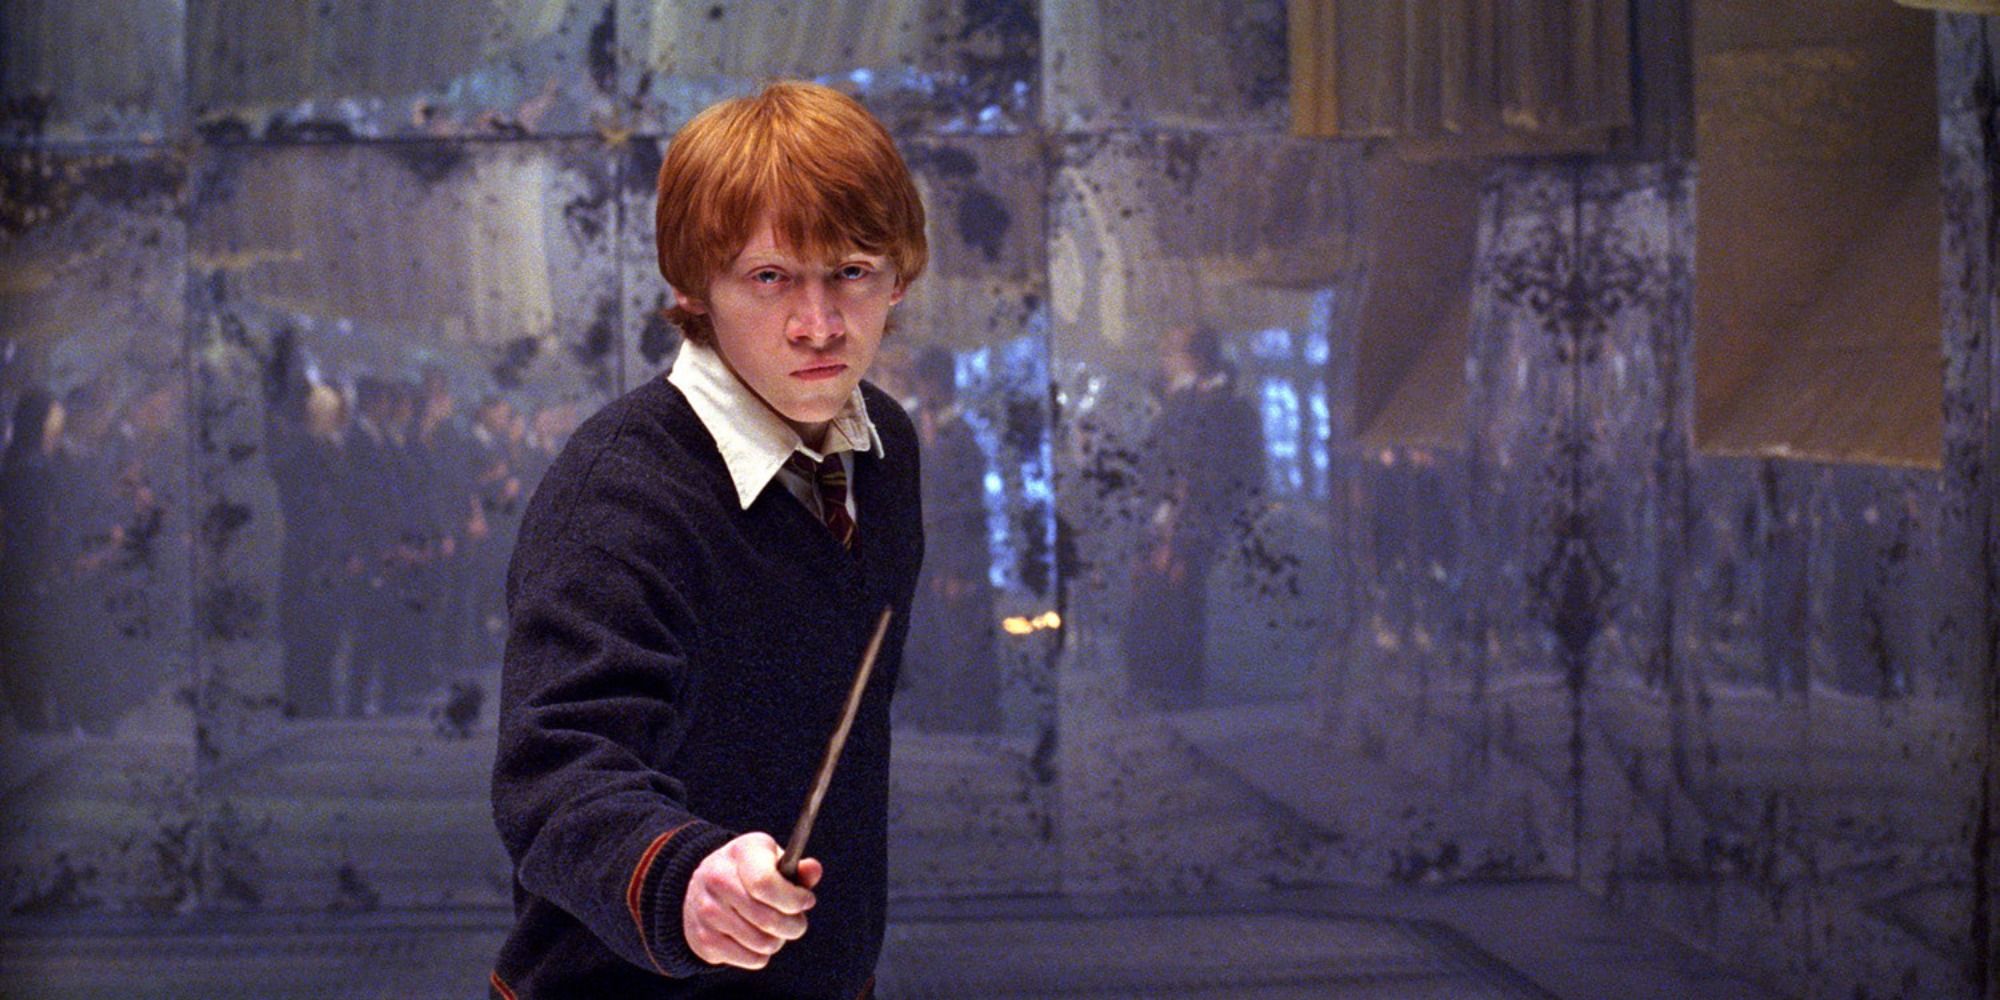 Ron Weasley raising his wand and looking determined in Harry Potter and the Order of the Phoenix